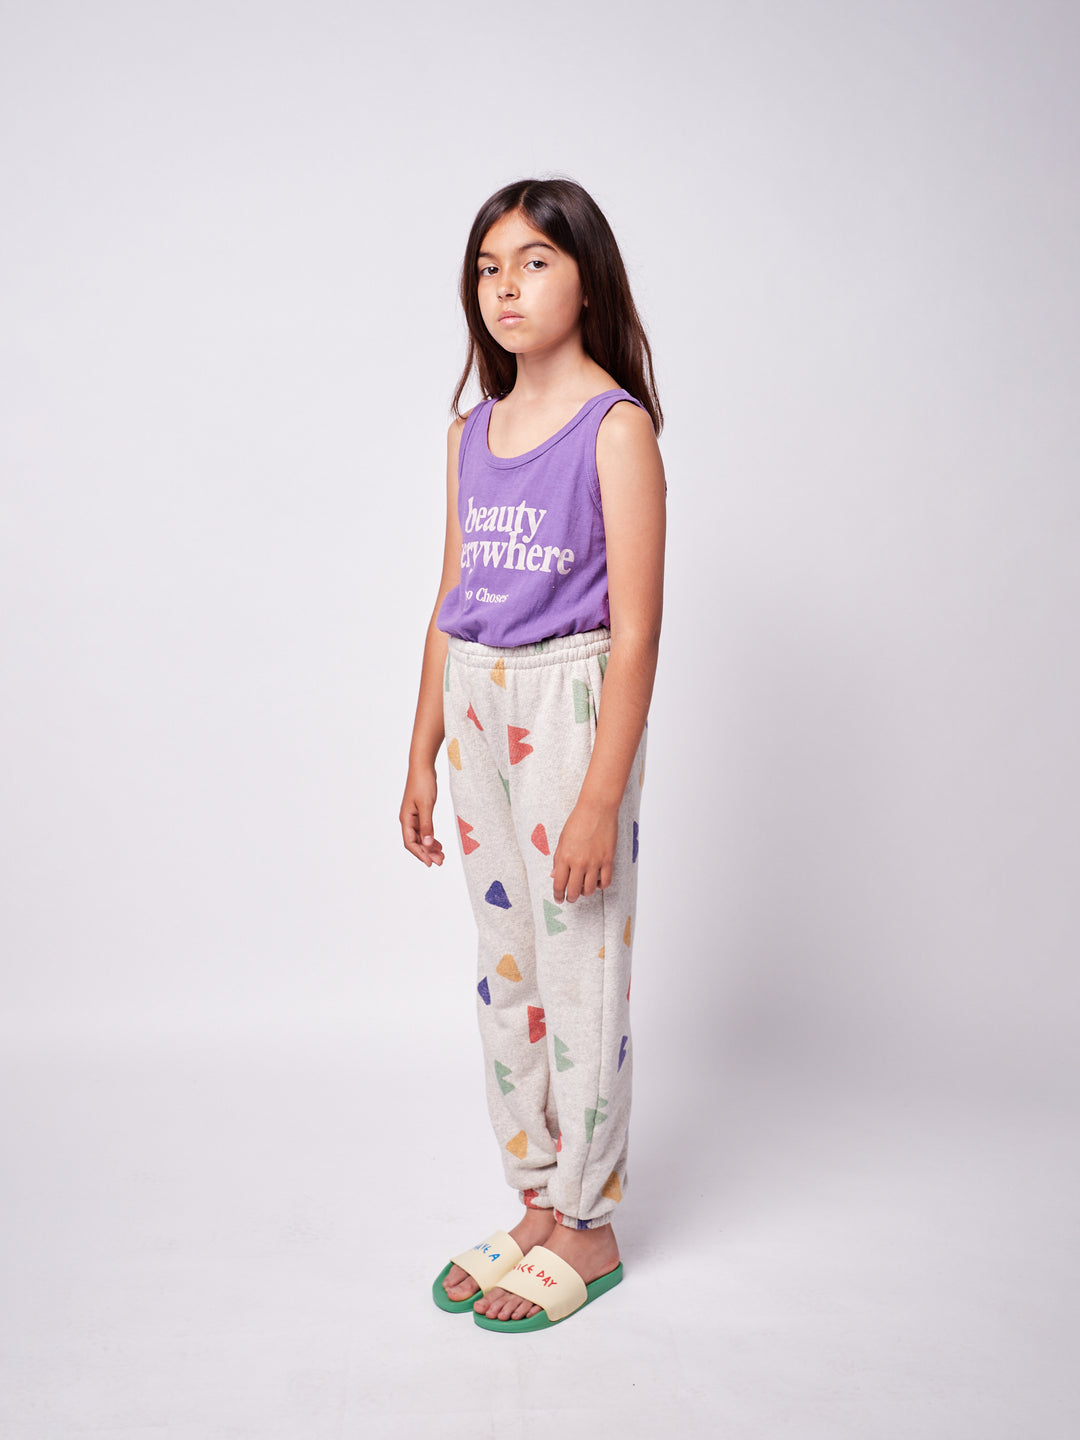 brown-haired little girl with purple bobo choses ''Beauty Everywhere'' playsuit and geometric multi-colored sweatpants